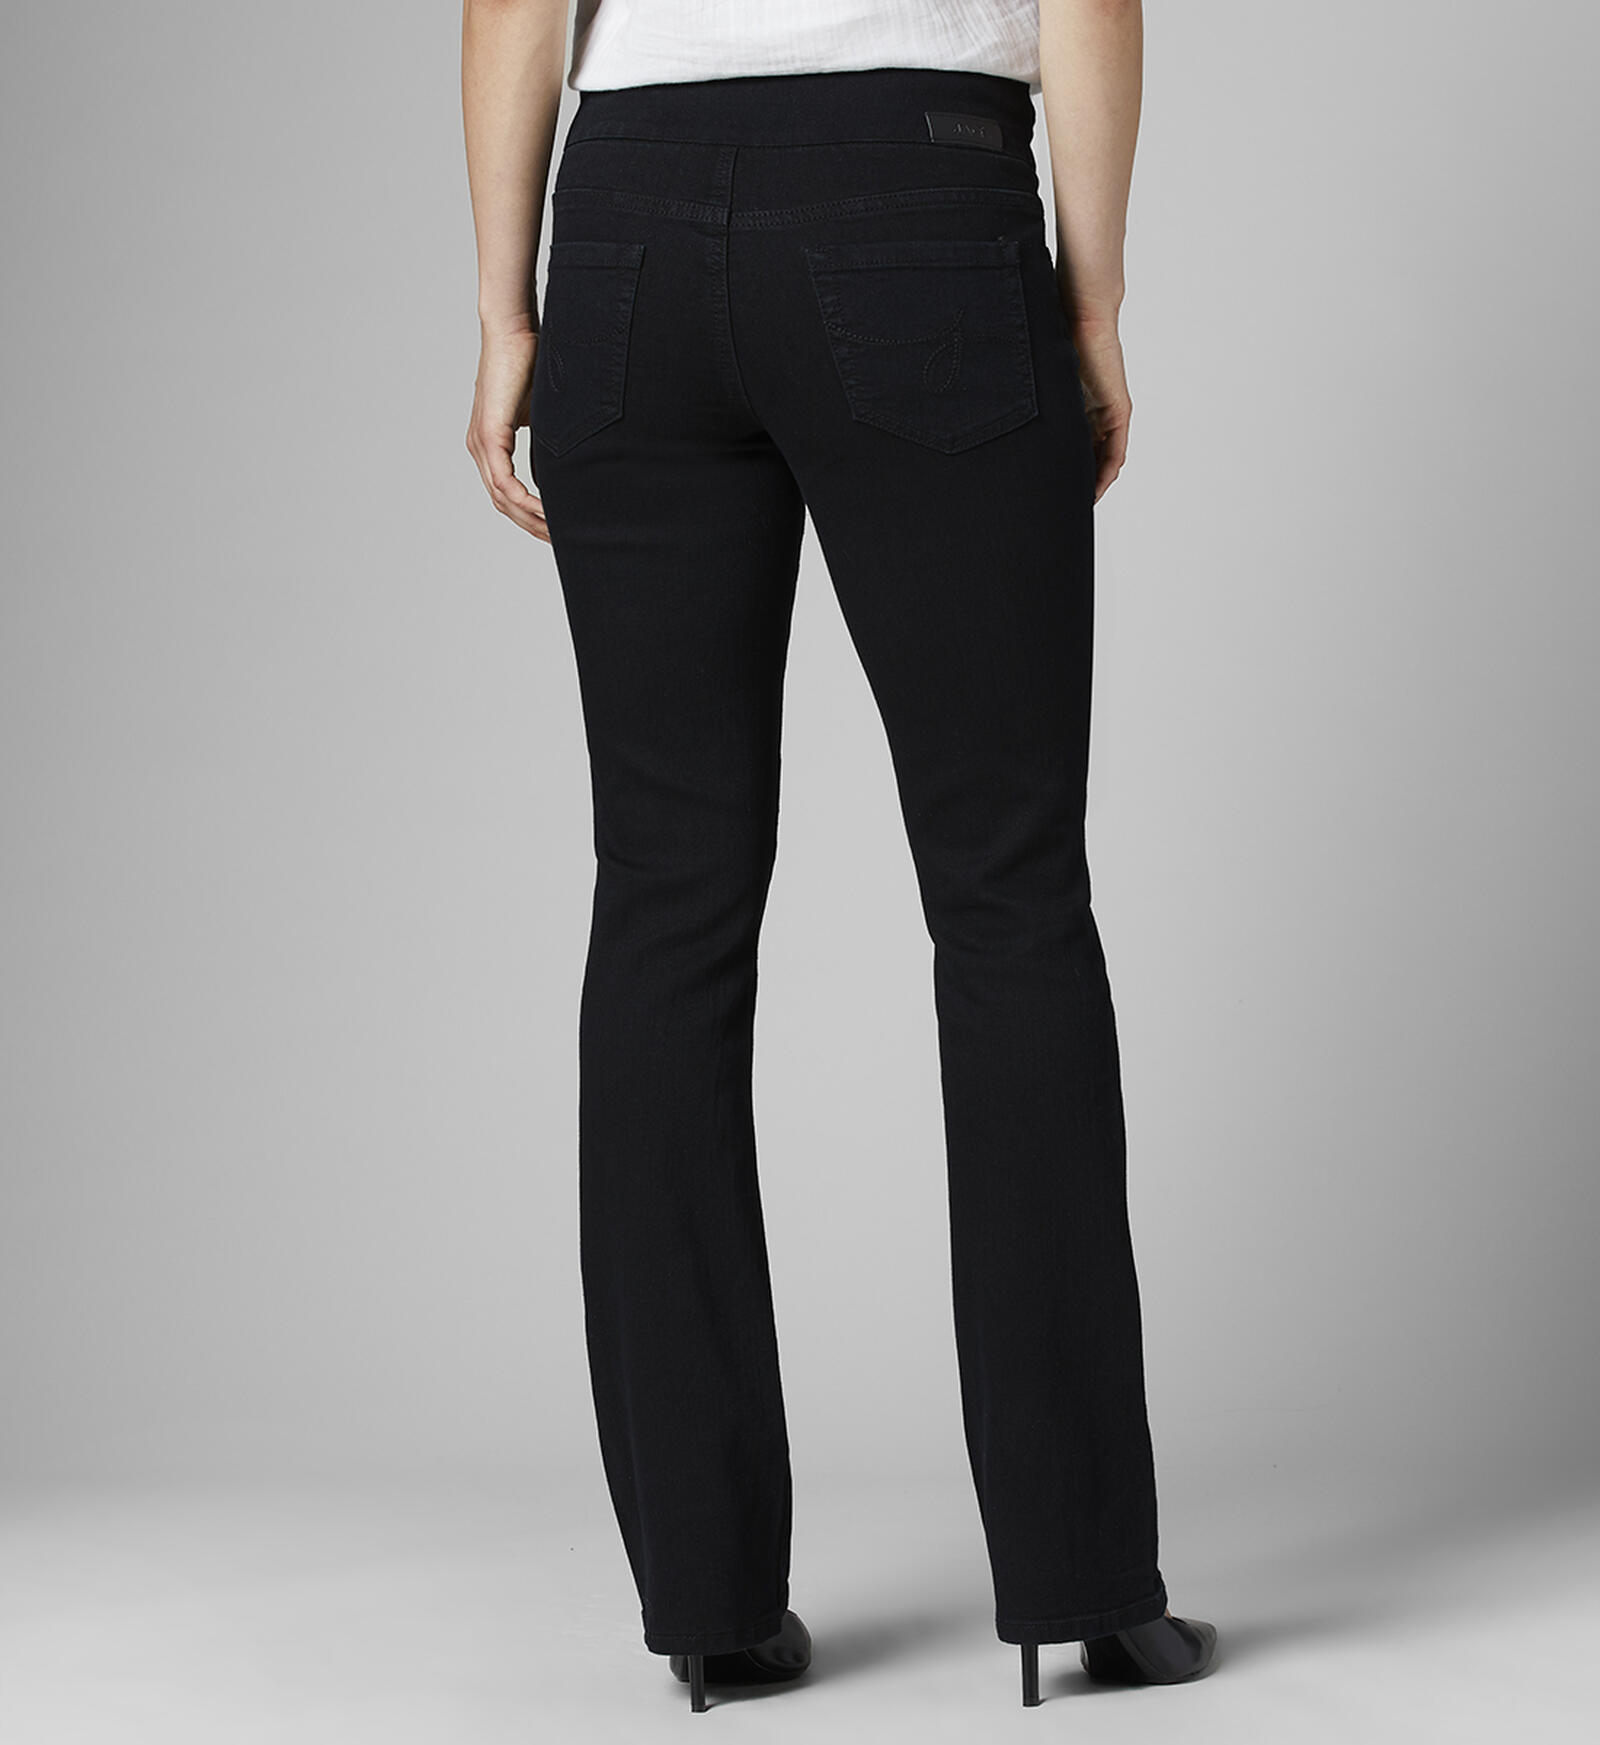 Black Bootcut jeans for Women